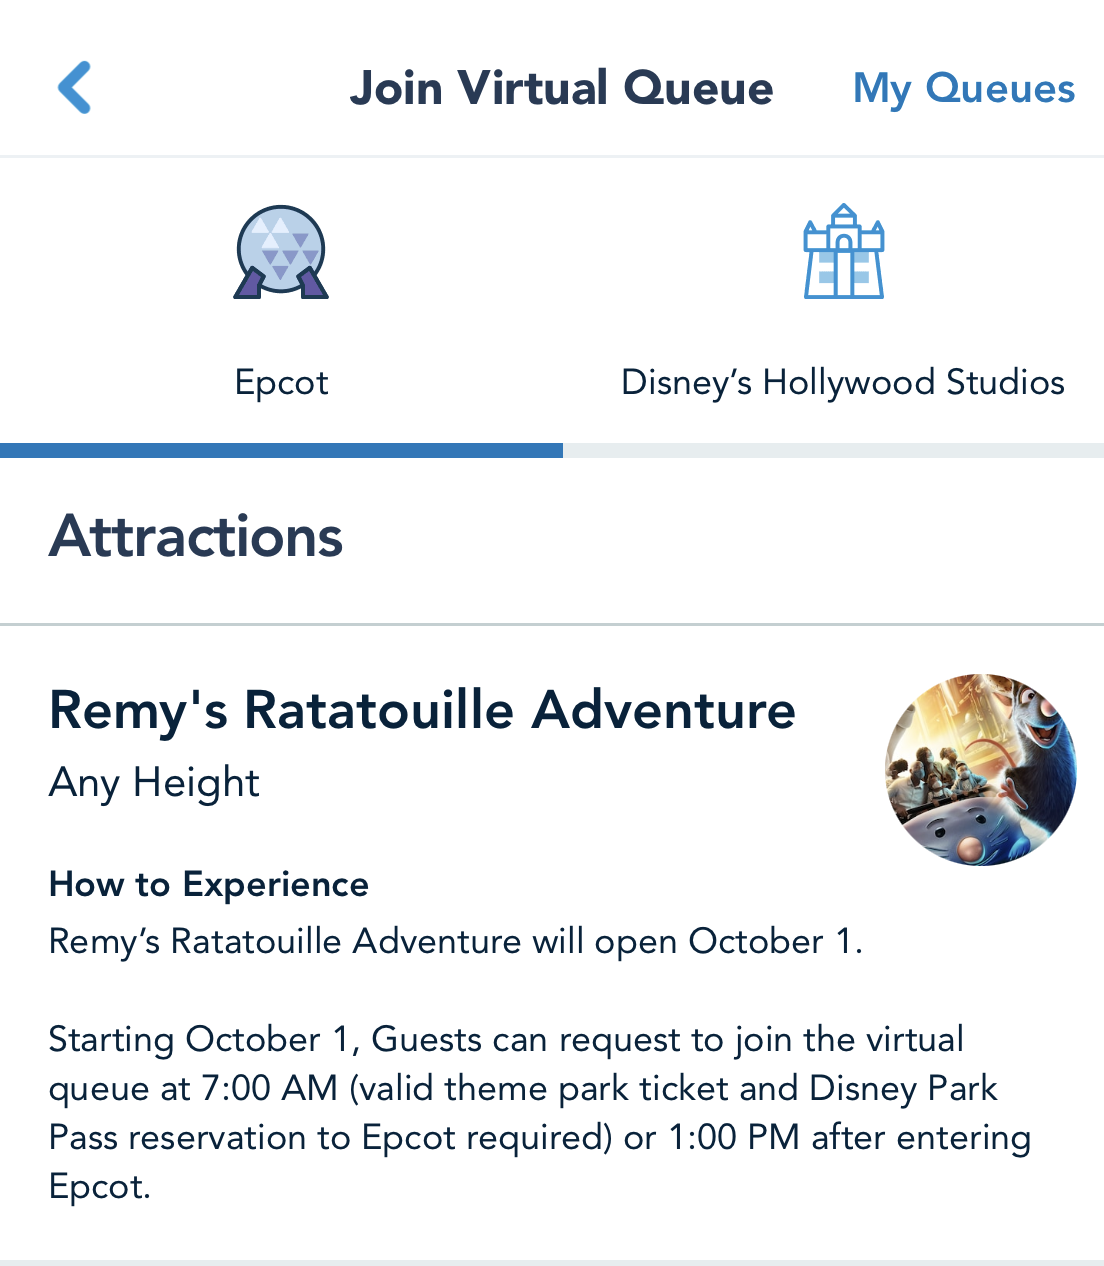 How the Virtual Queue for Remy’s Ratatouille Adventure works